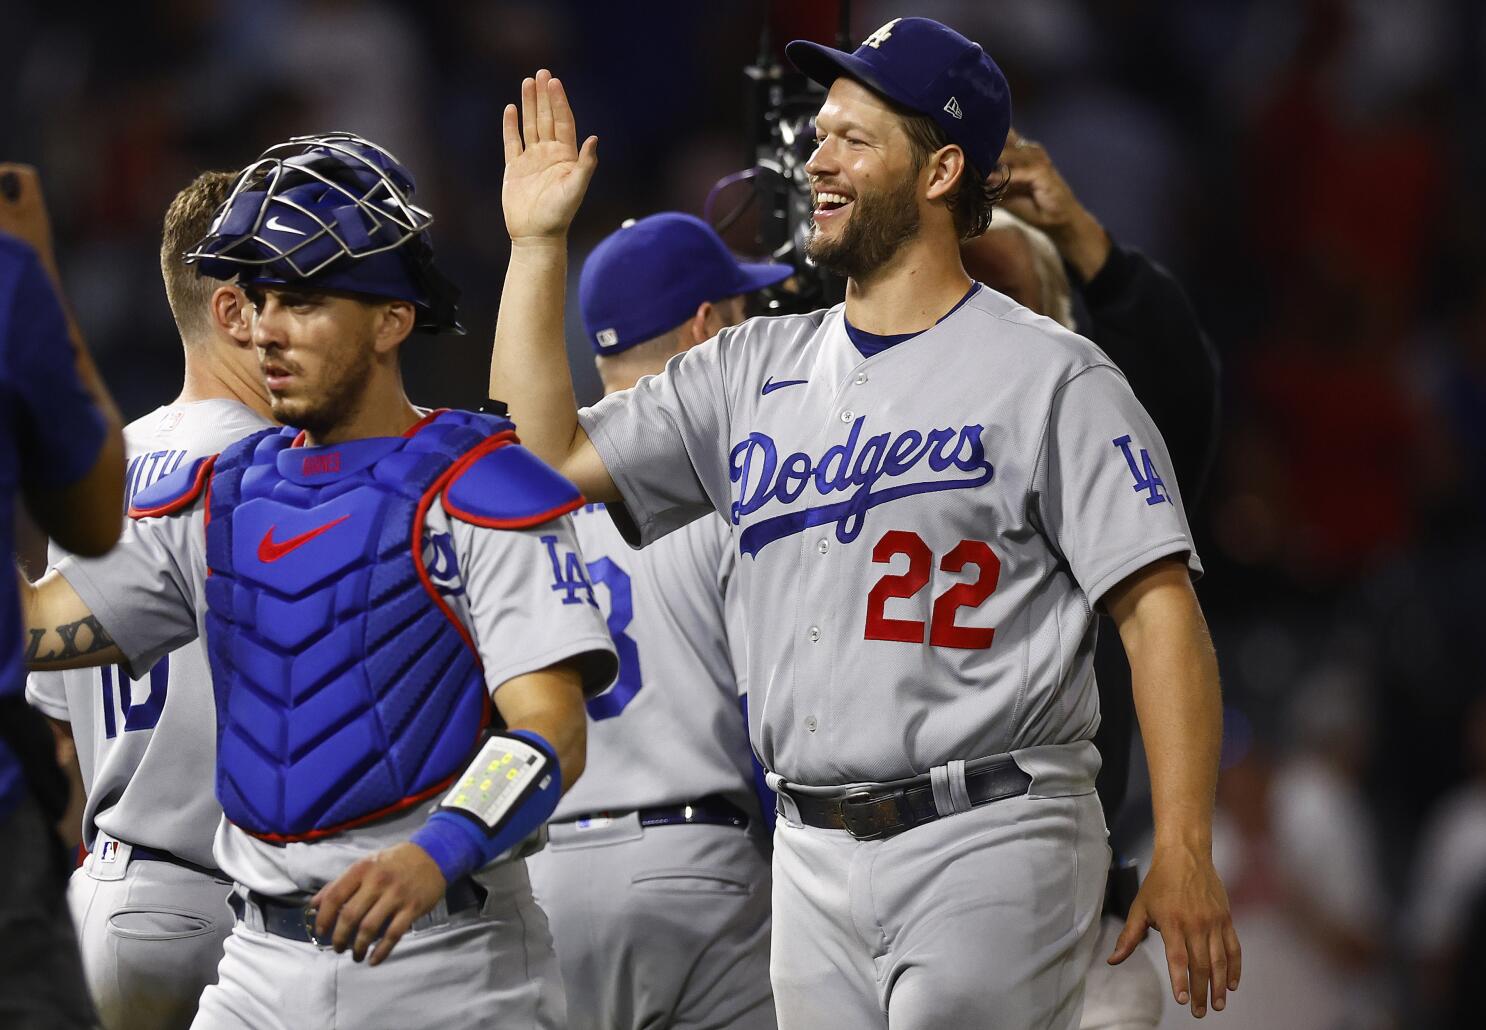 Kershaw perfect into 8th inning; Dodgers beat Angels 9-1